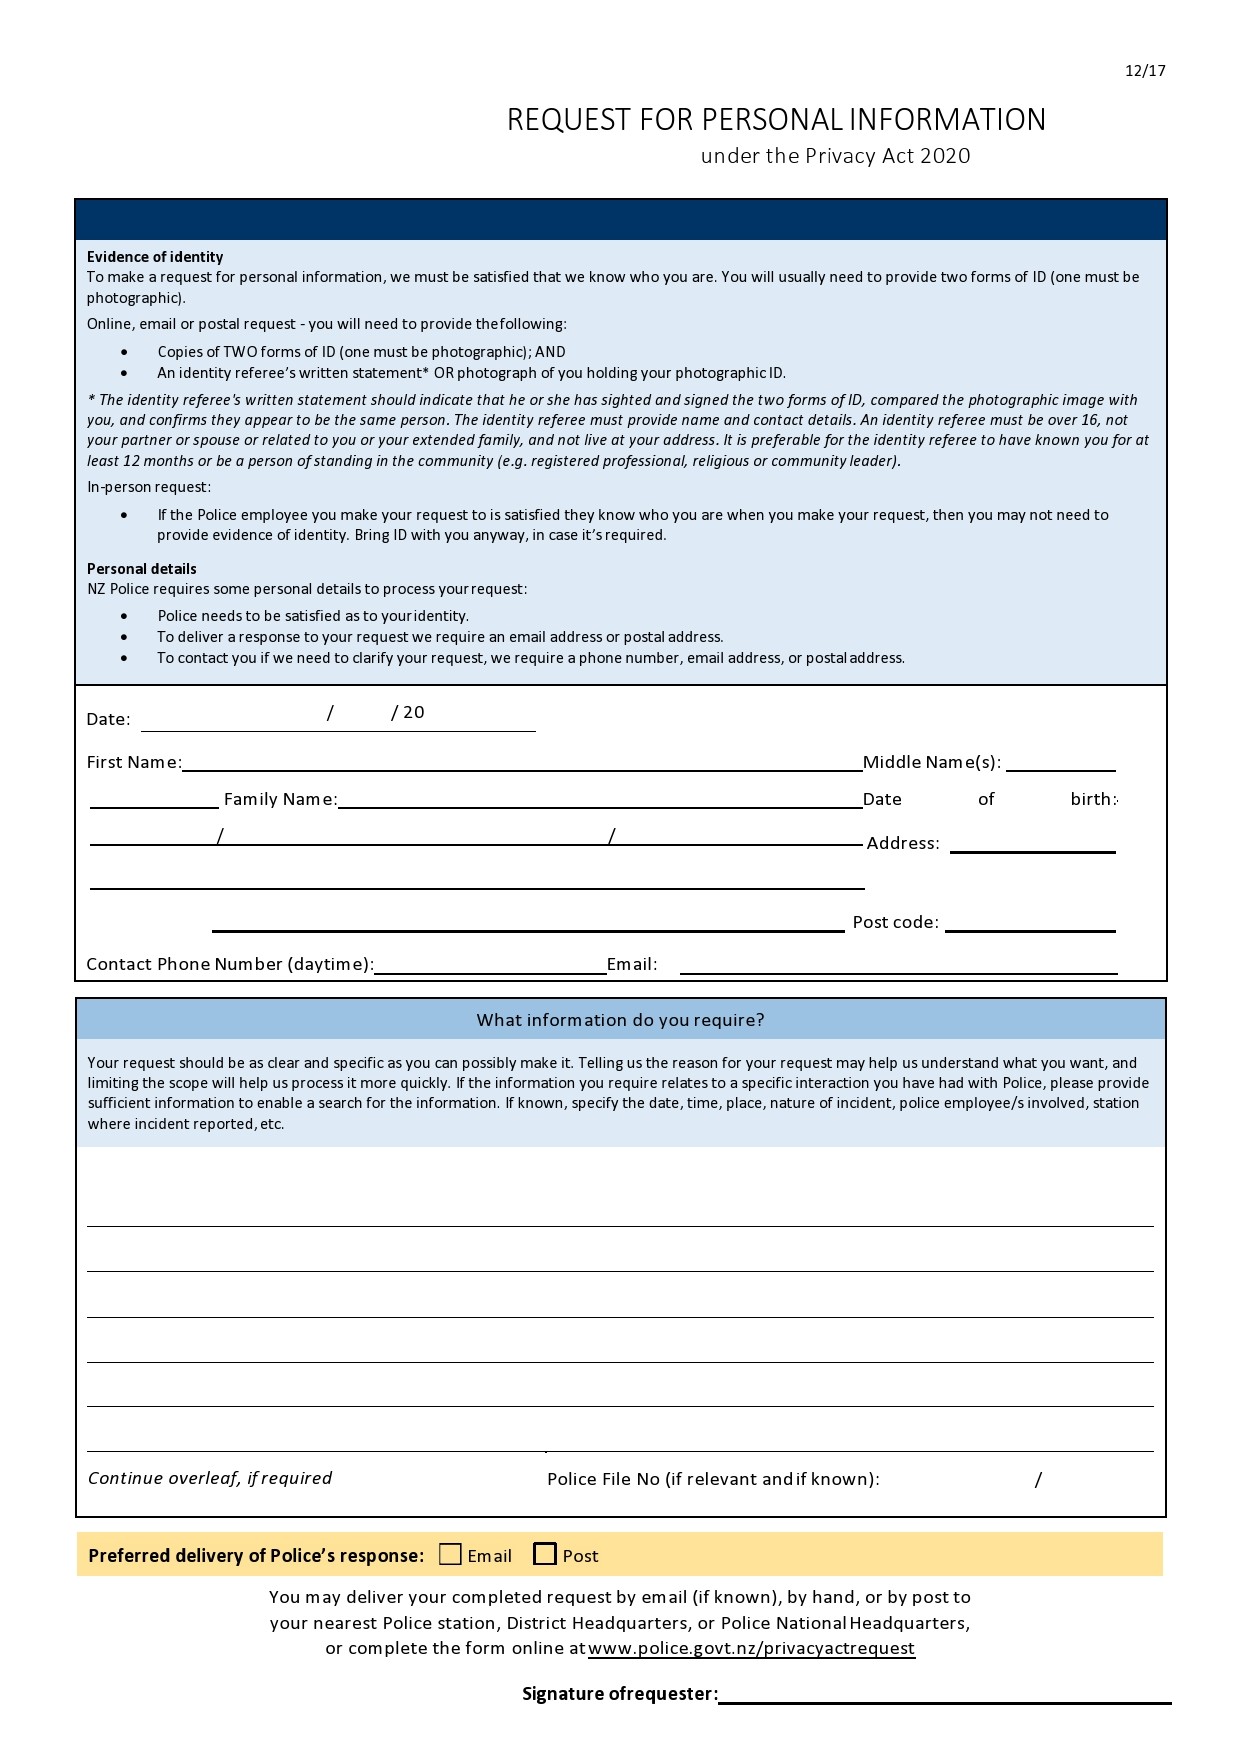 Free personal information form 22